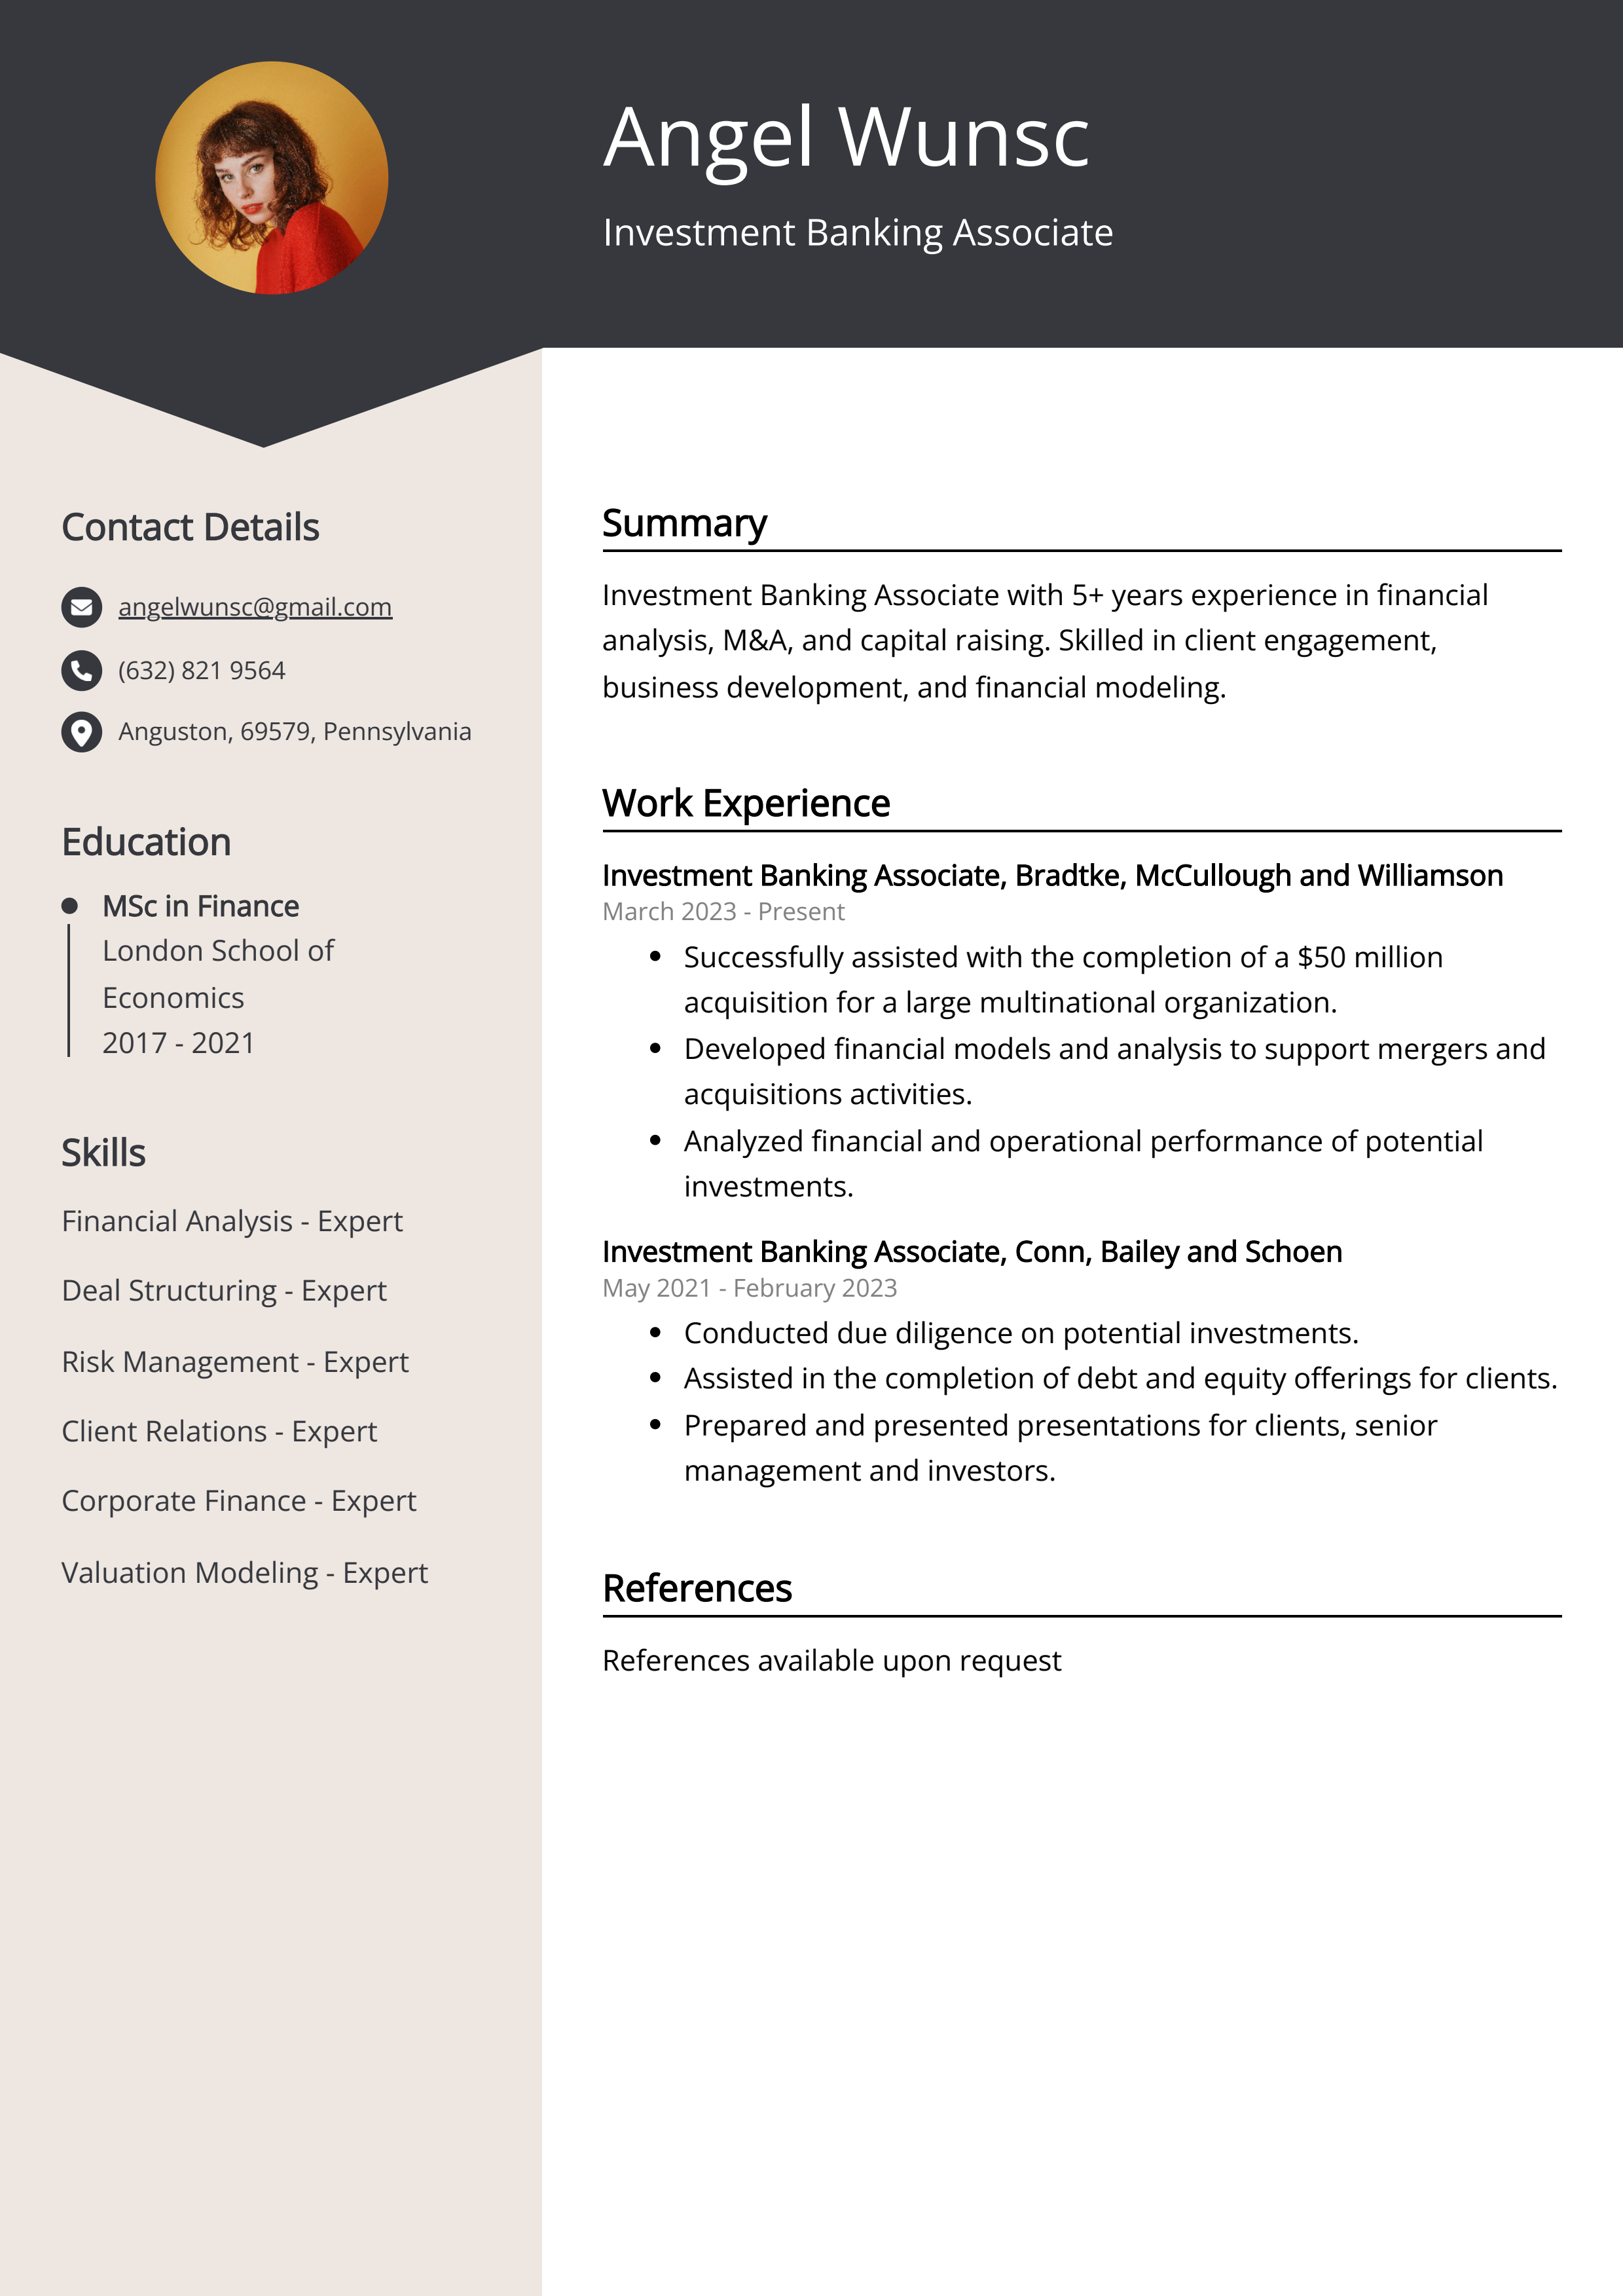 Investment Banking Associate CV Example